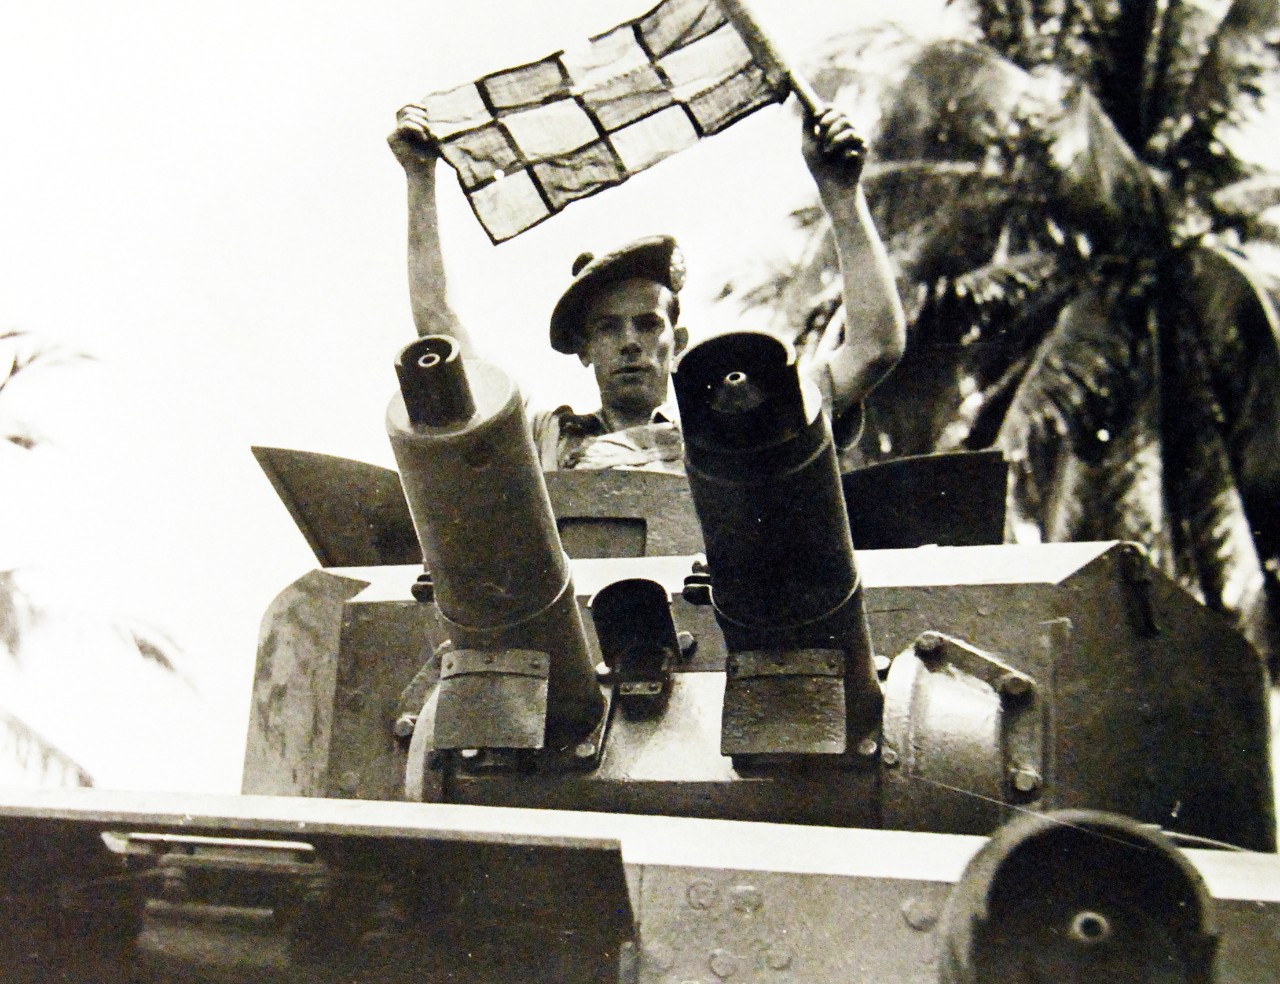 Lot 11612-8:  Malayan Campaign, December 1941-January 1942.  Argylls and Sutherlanders in Malaya.  Constant practice in patrolling jungle roads, keeps members of this famous regiment in full fighting for their special job.  Photograph shows a member of a vehicle crew putting up a signal.  Office of War Information Photograph. Courtesy of the Library of Congress. (2016/01/22).